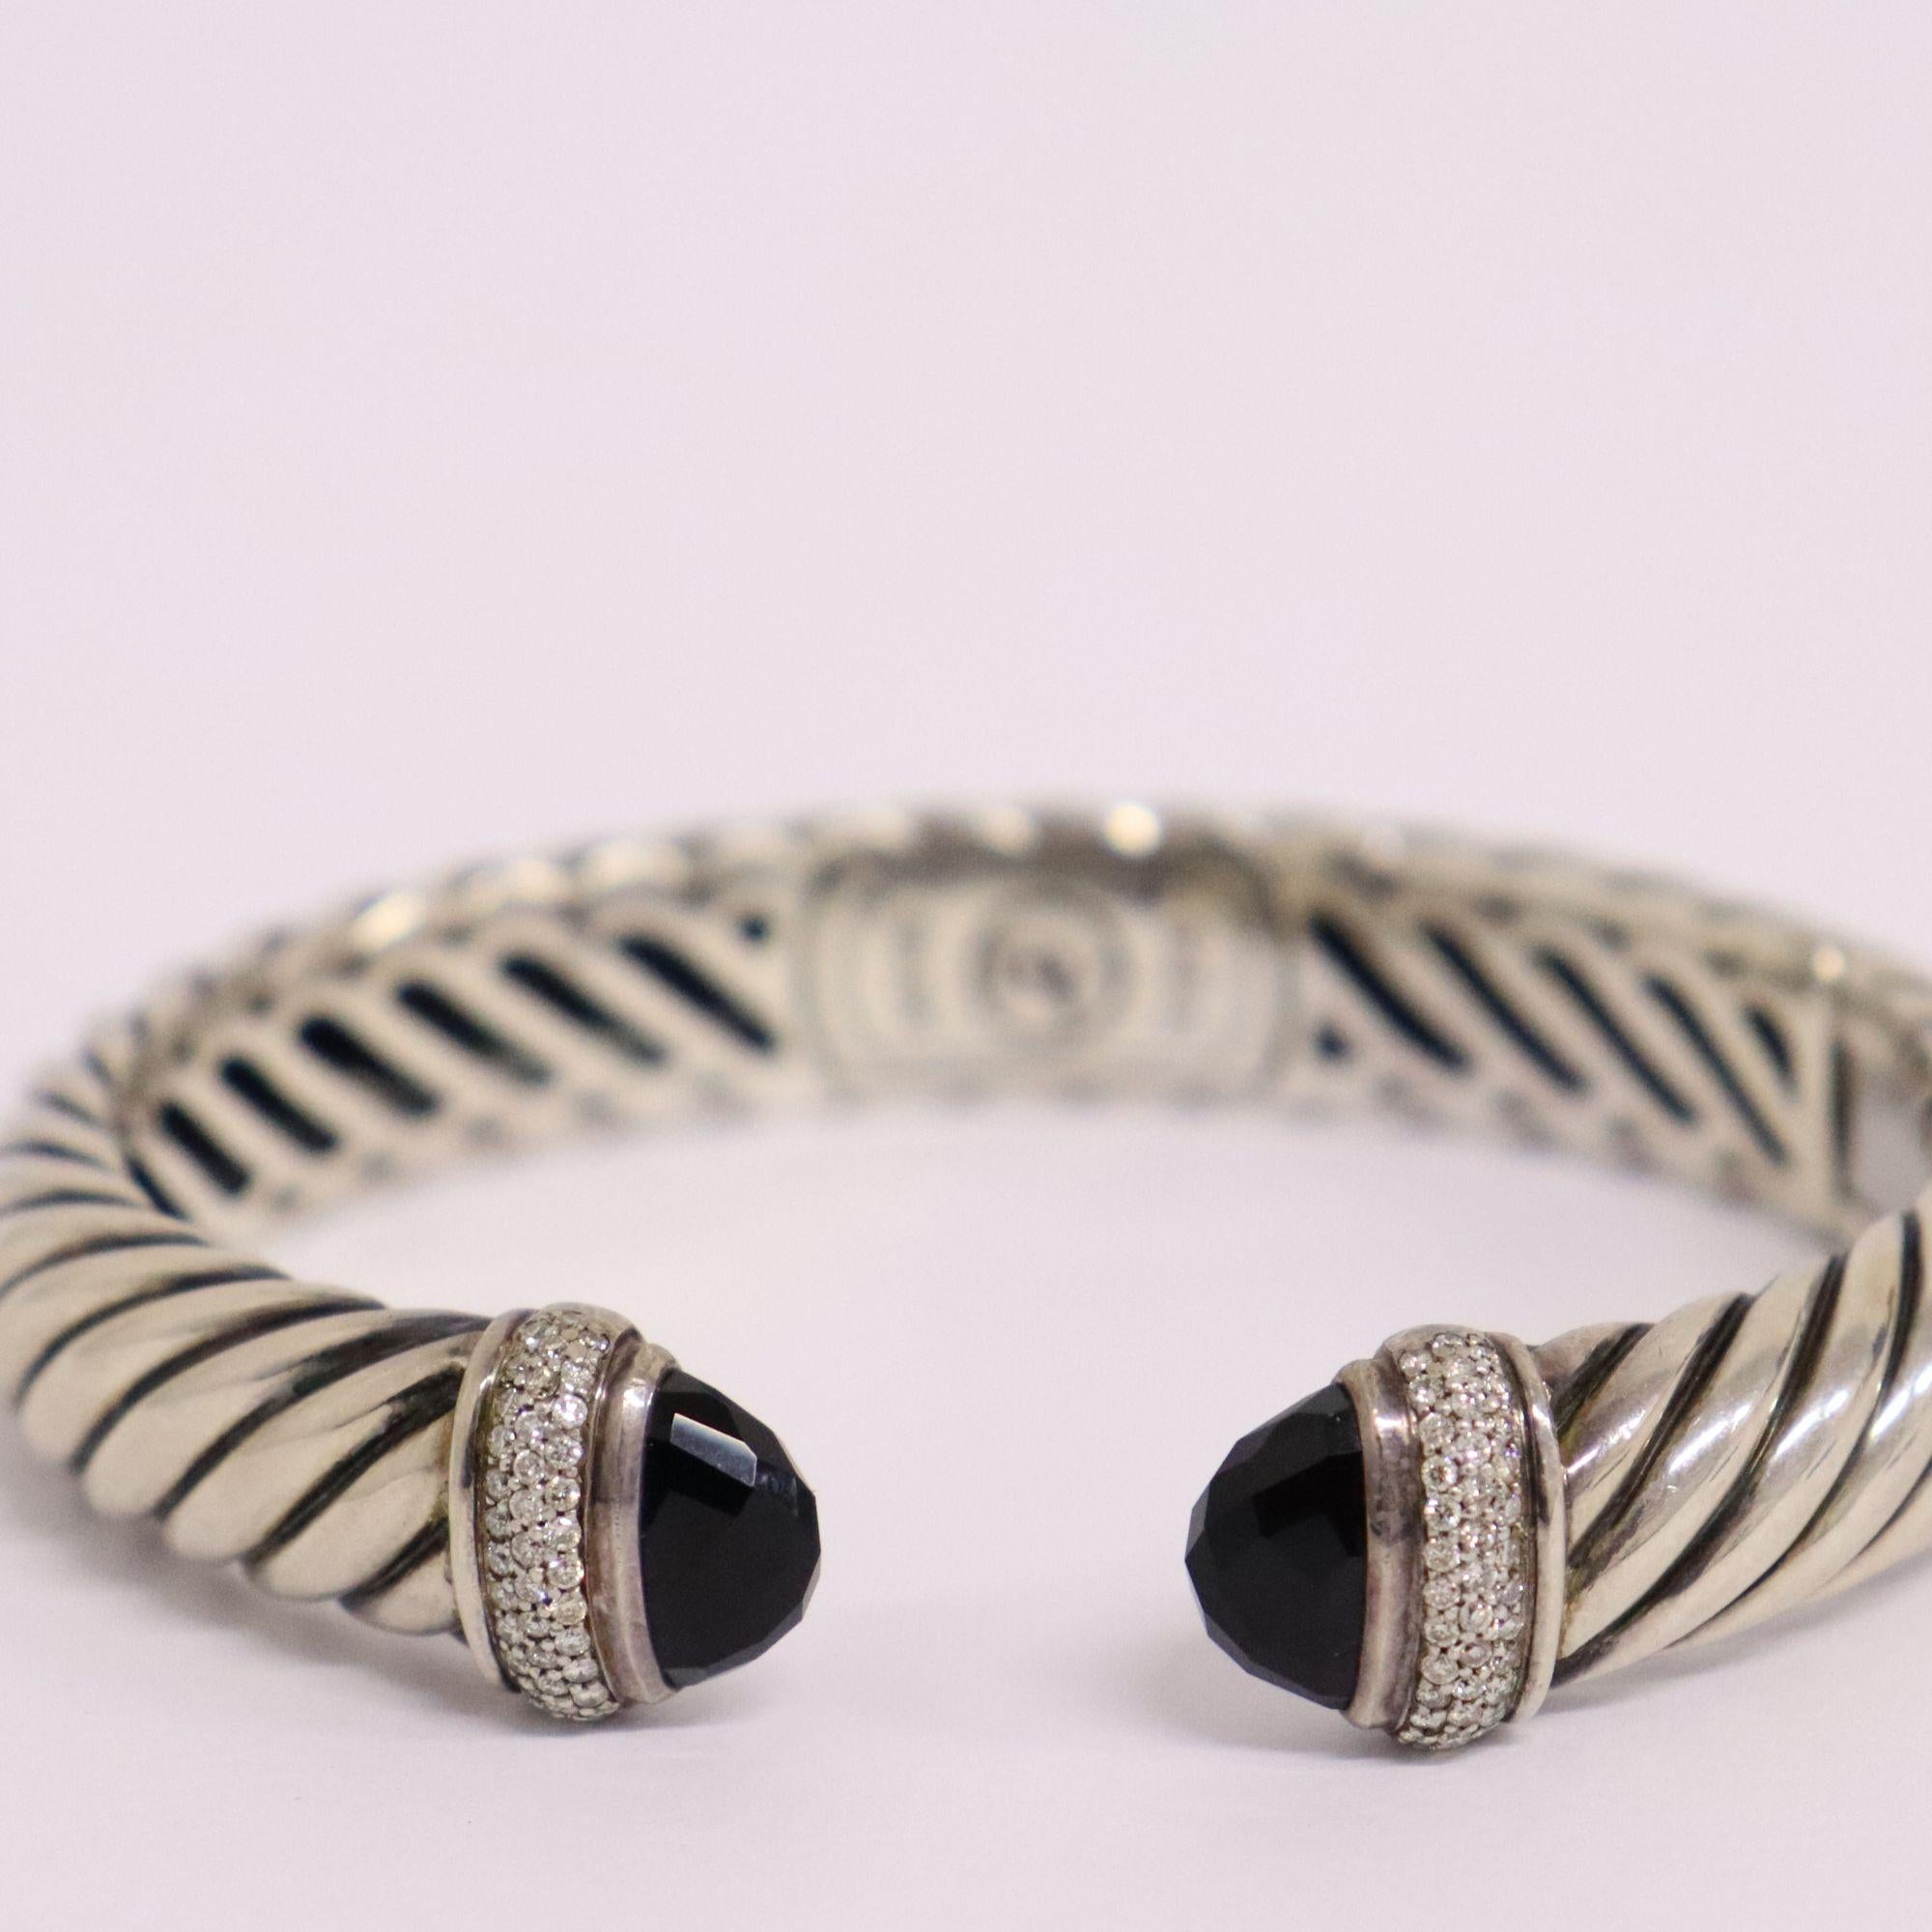 David Yurman sterling silver waverly open cuff bracelet with onyx and approximately 0.36ctw of Diamonds.

Condition: very minimal signs of wear
Approx Diameter: 18cm
Width: 1cm